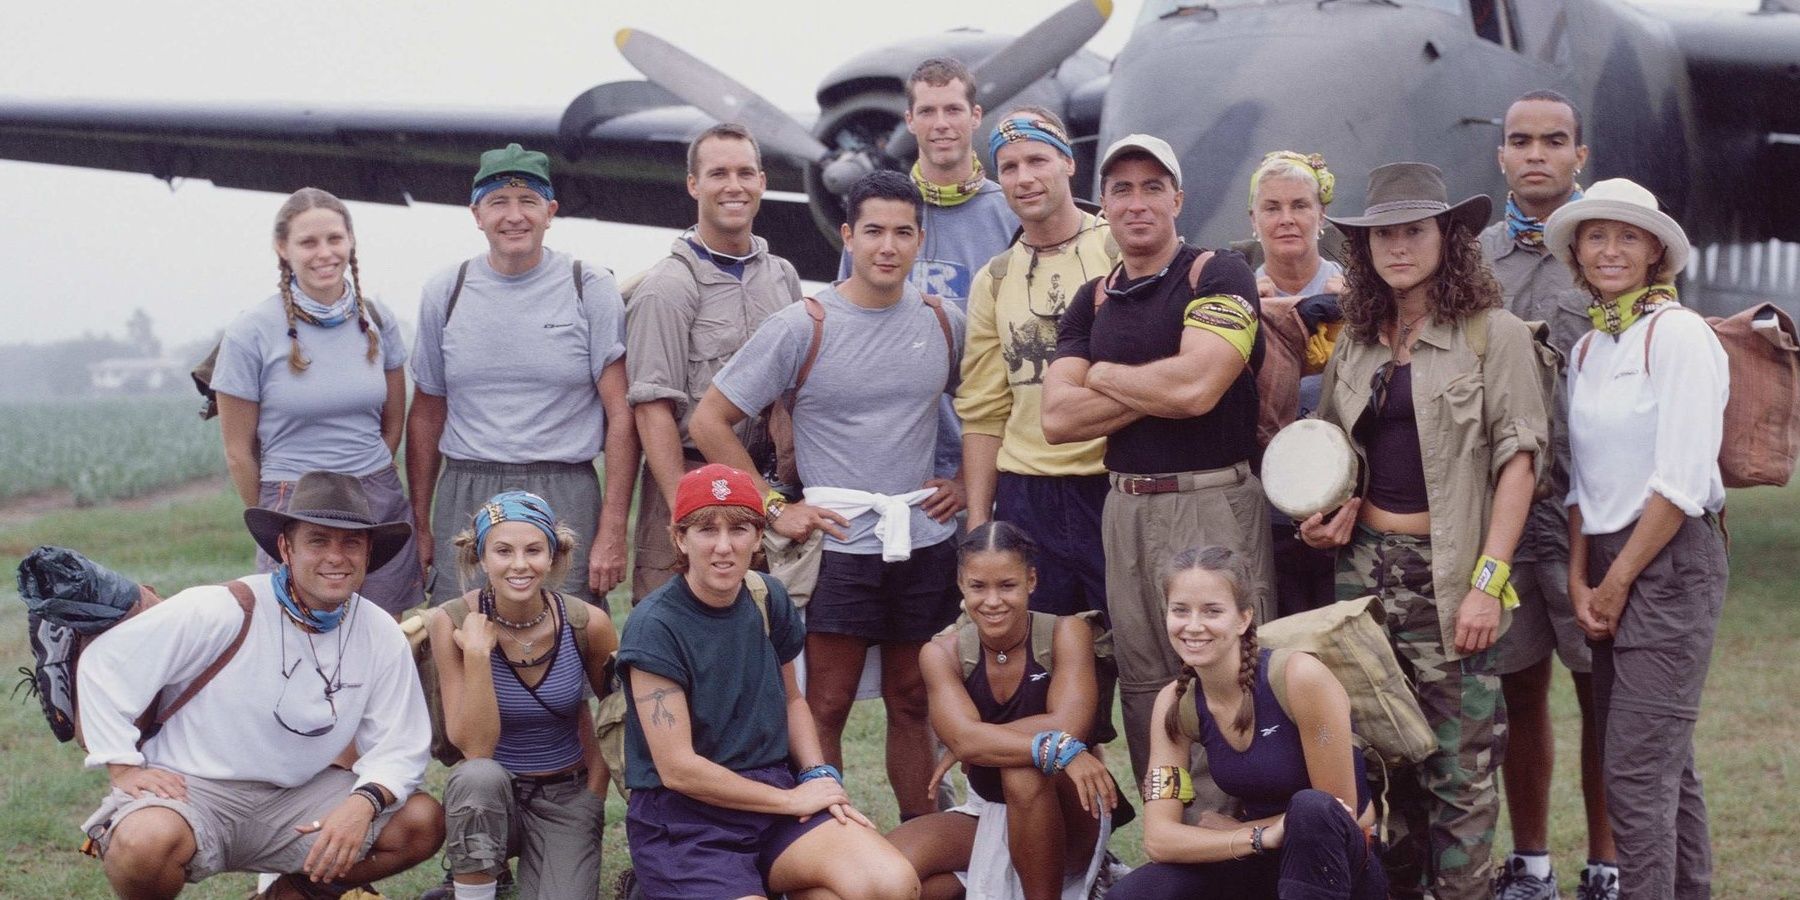 The cast of Australian Outback around a plane